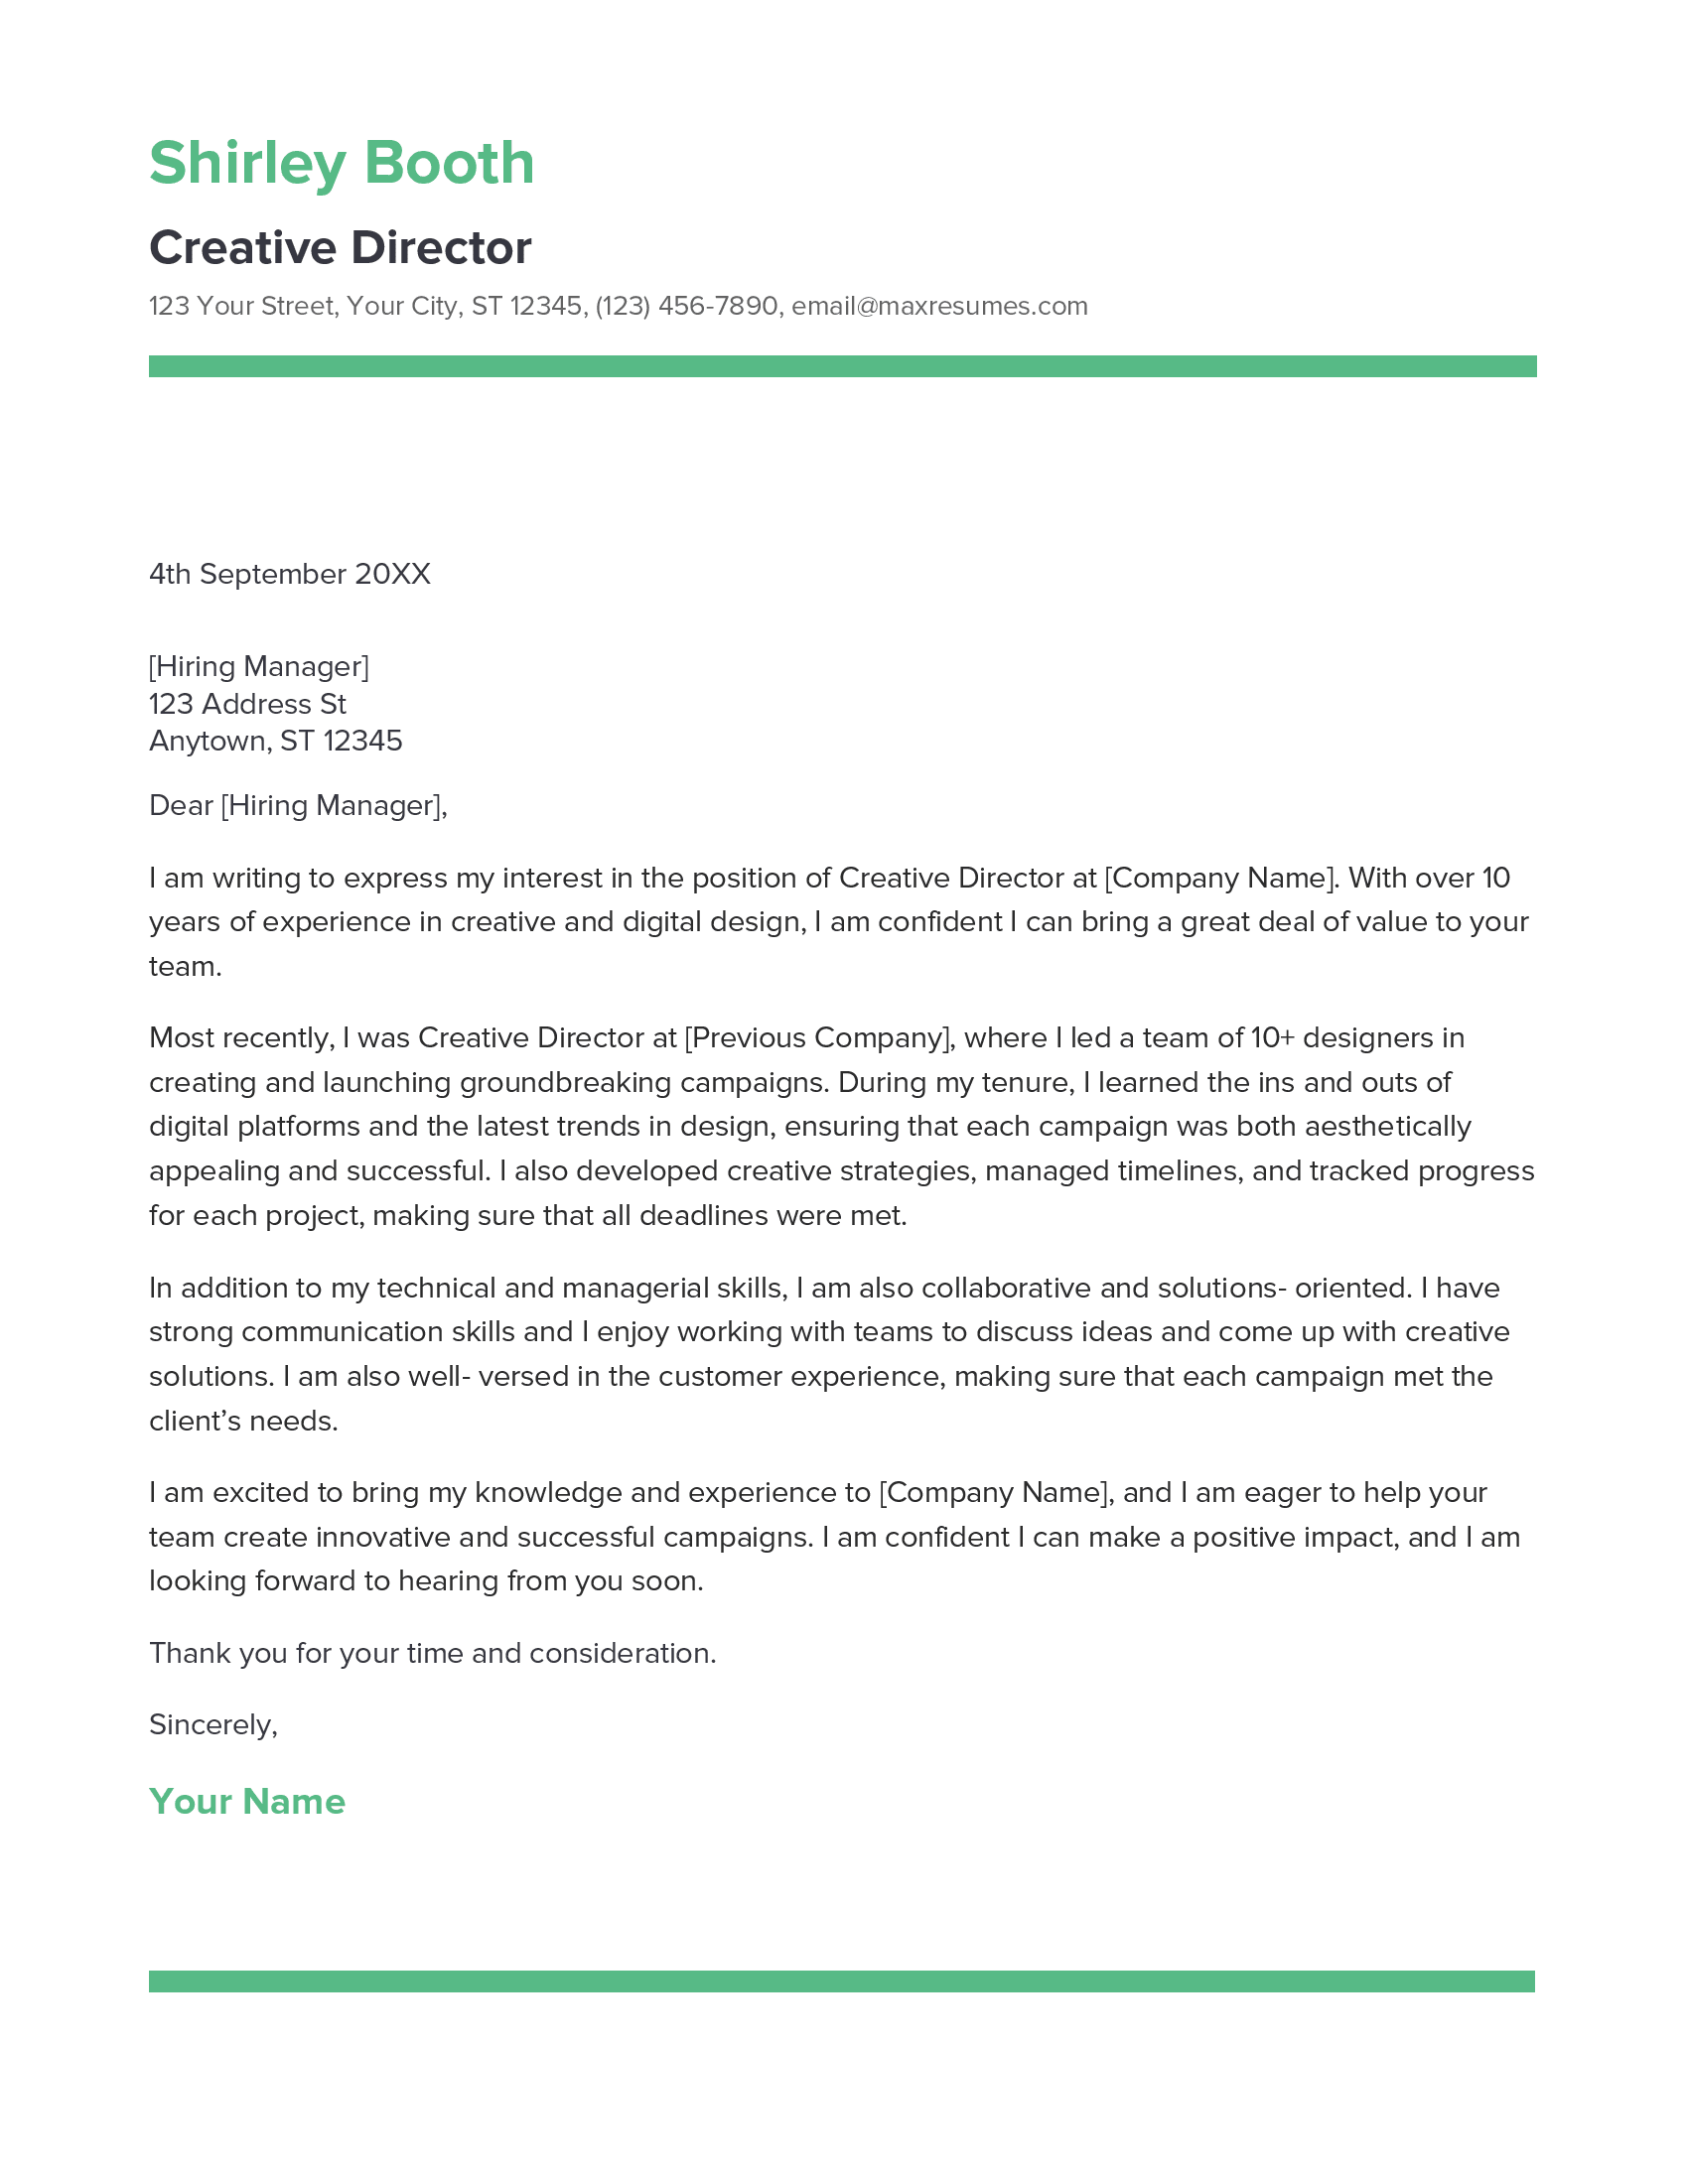 Creative Director Cover Letter Example